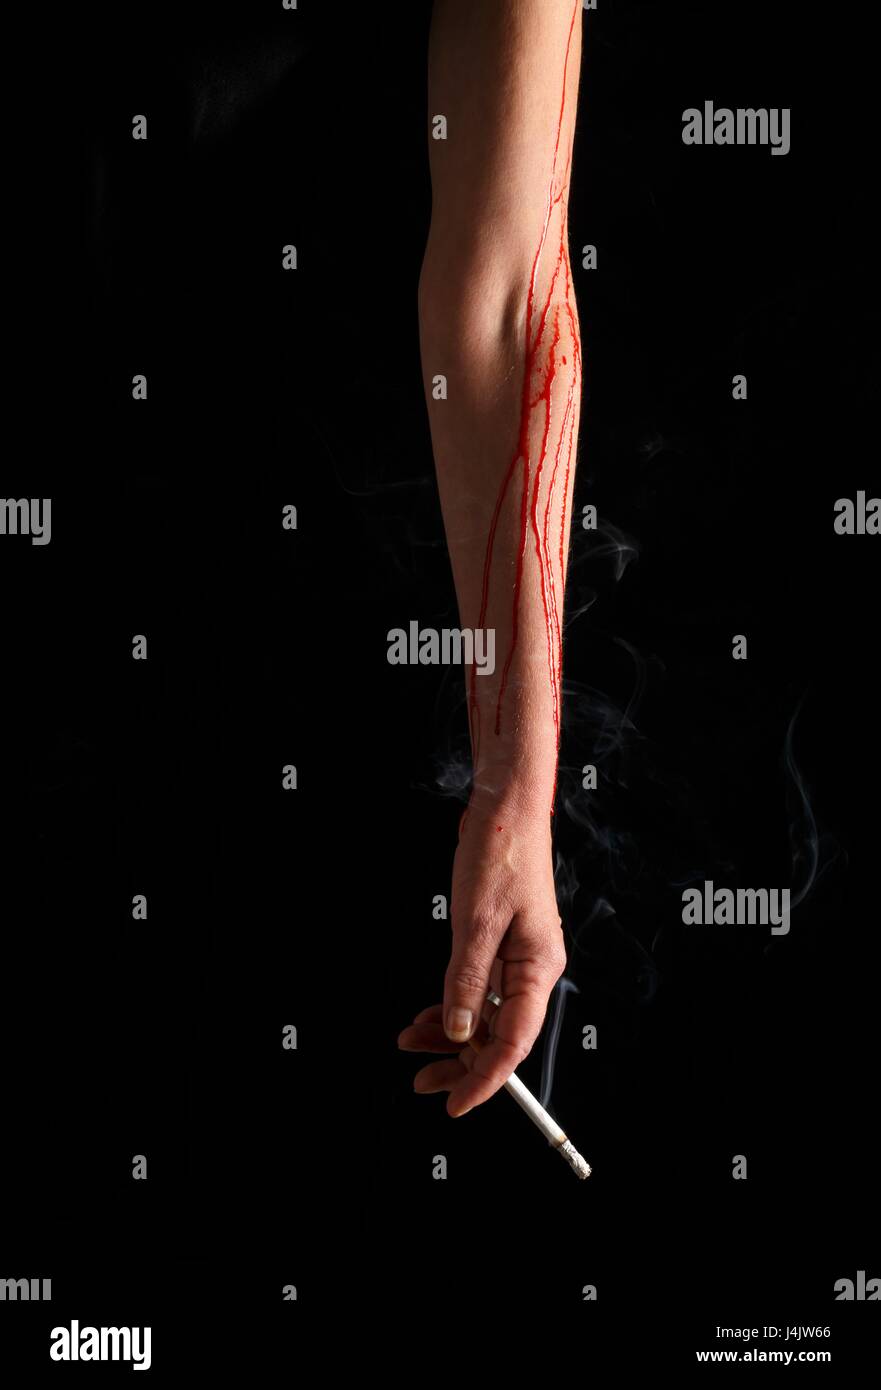 Bleeding arm with hand holding a cigarette, studio shot. Stock Photo